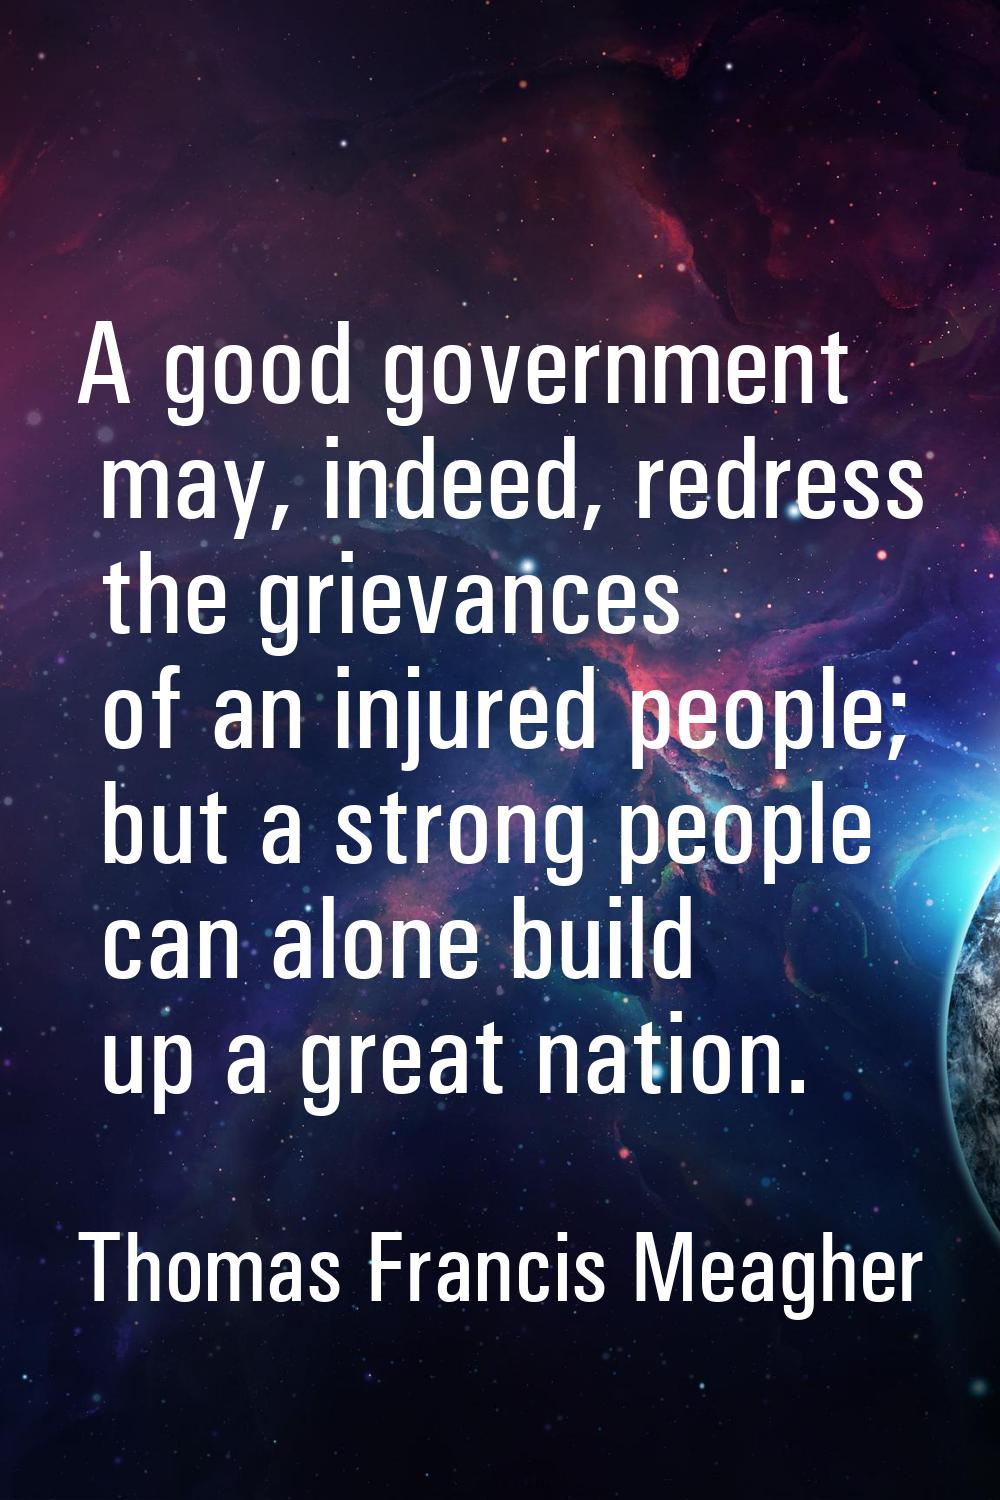 A good government may, indeed, redress the grievances of an injured people; but a strong people can